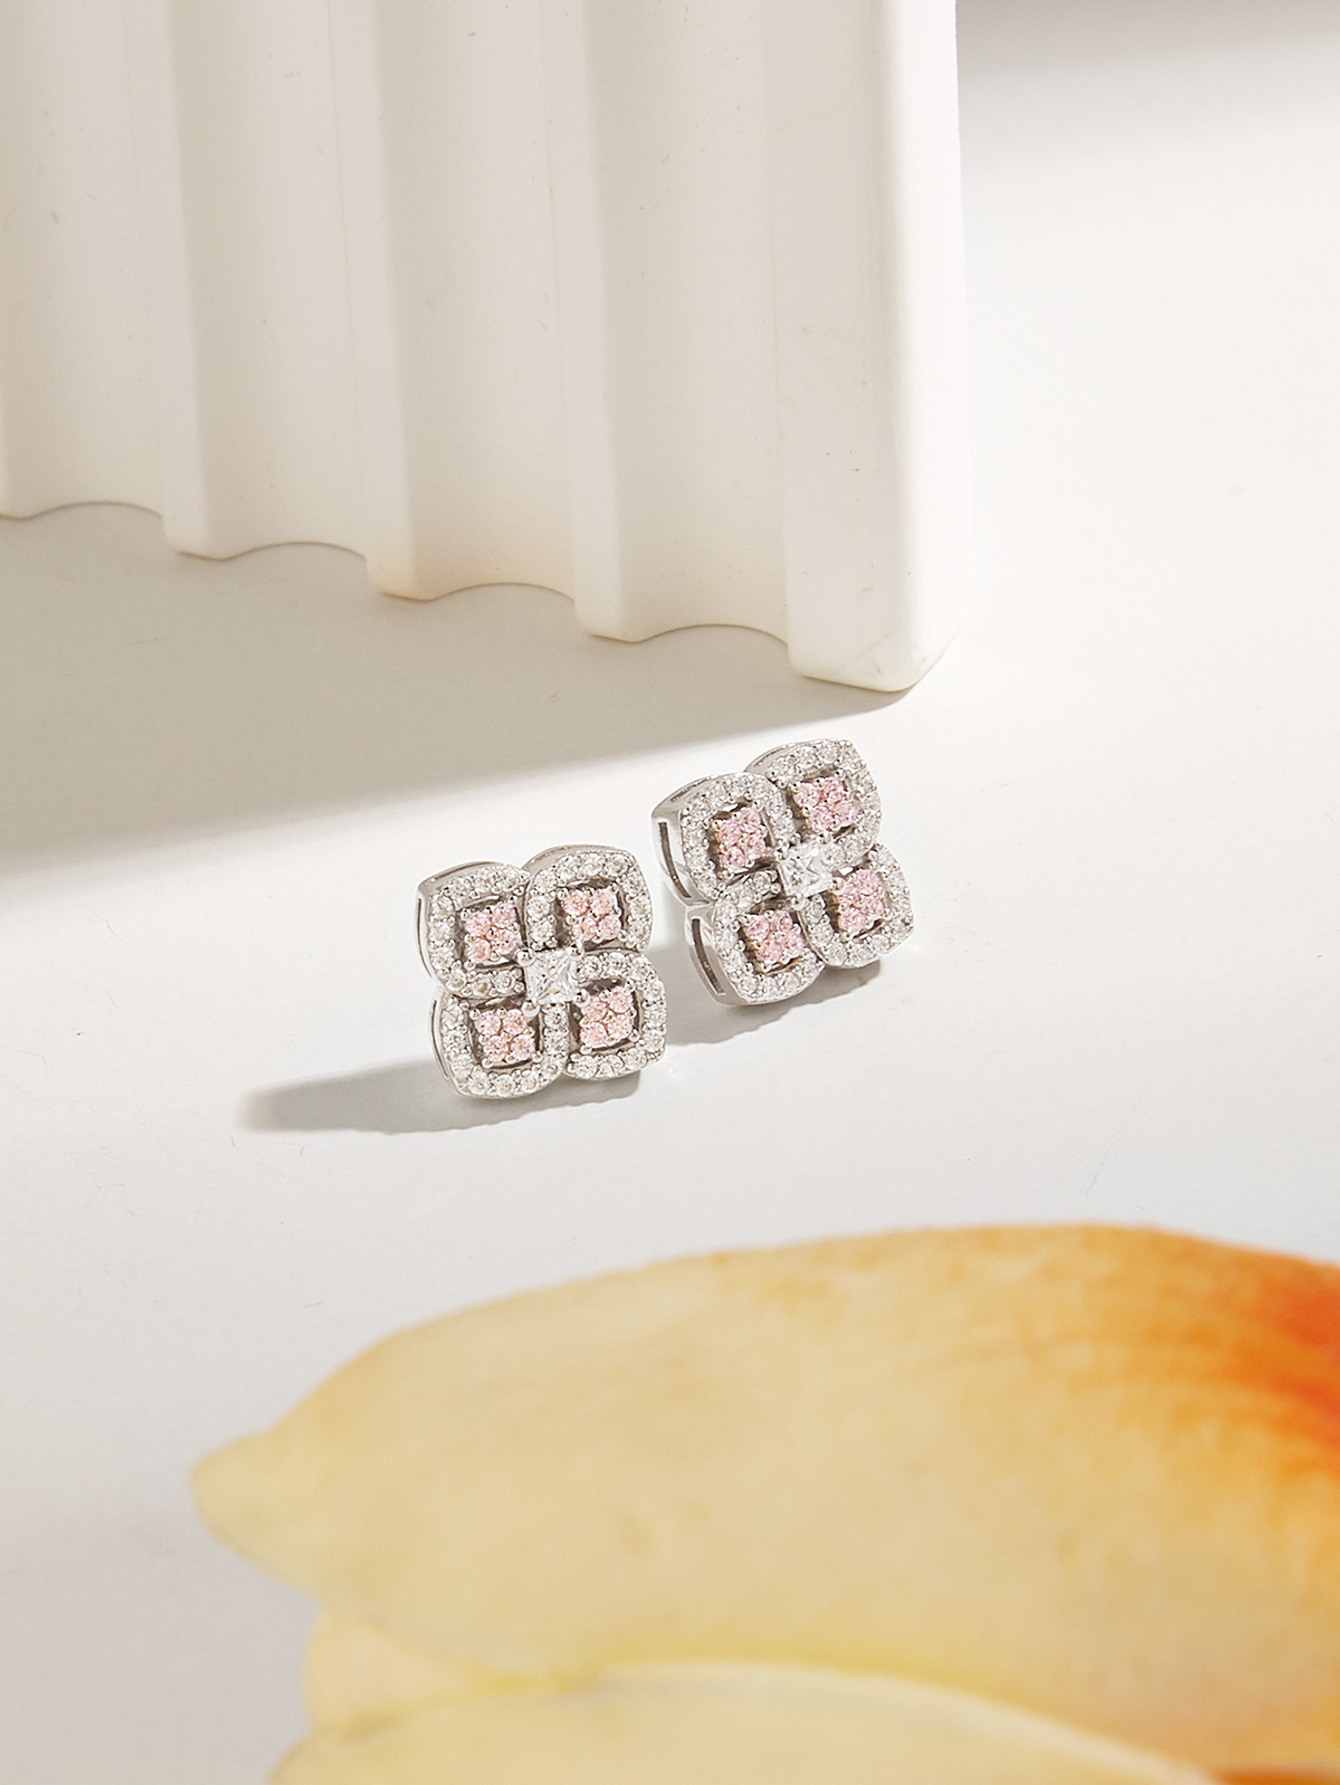 High-Quality S925 Silver Stud Earrings with Silver Inlay and Fashionable Pink Ice Flower Cut Cubic Zirconia - Suitable for Women’s Daily, Dating, Travel, and Party - Comes in a Gift Box